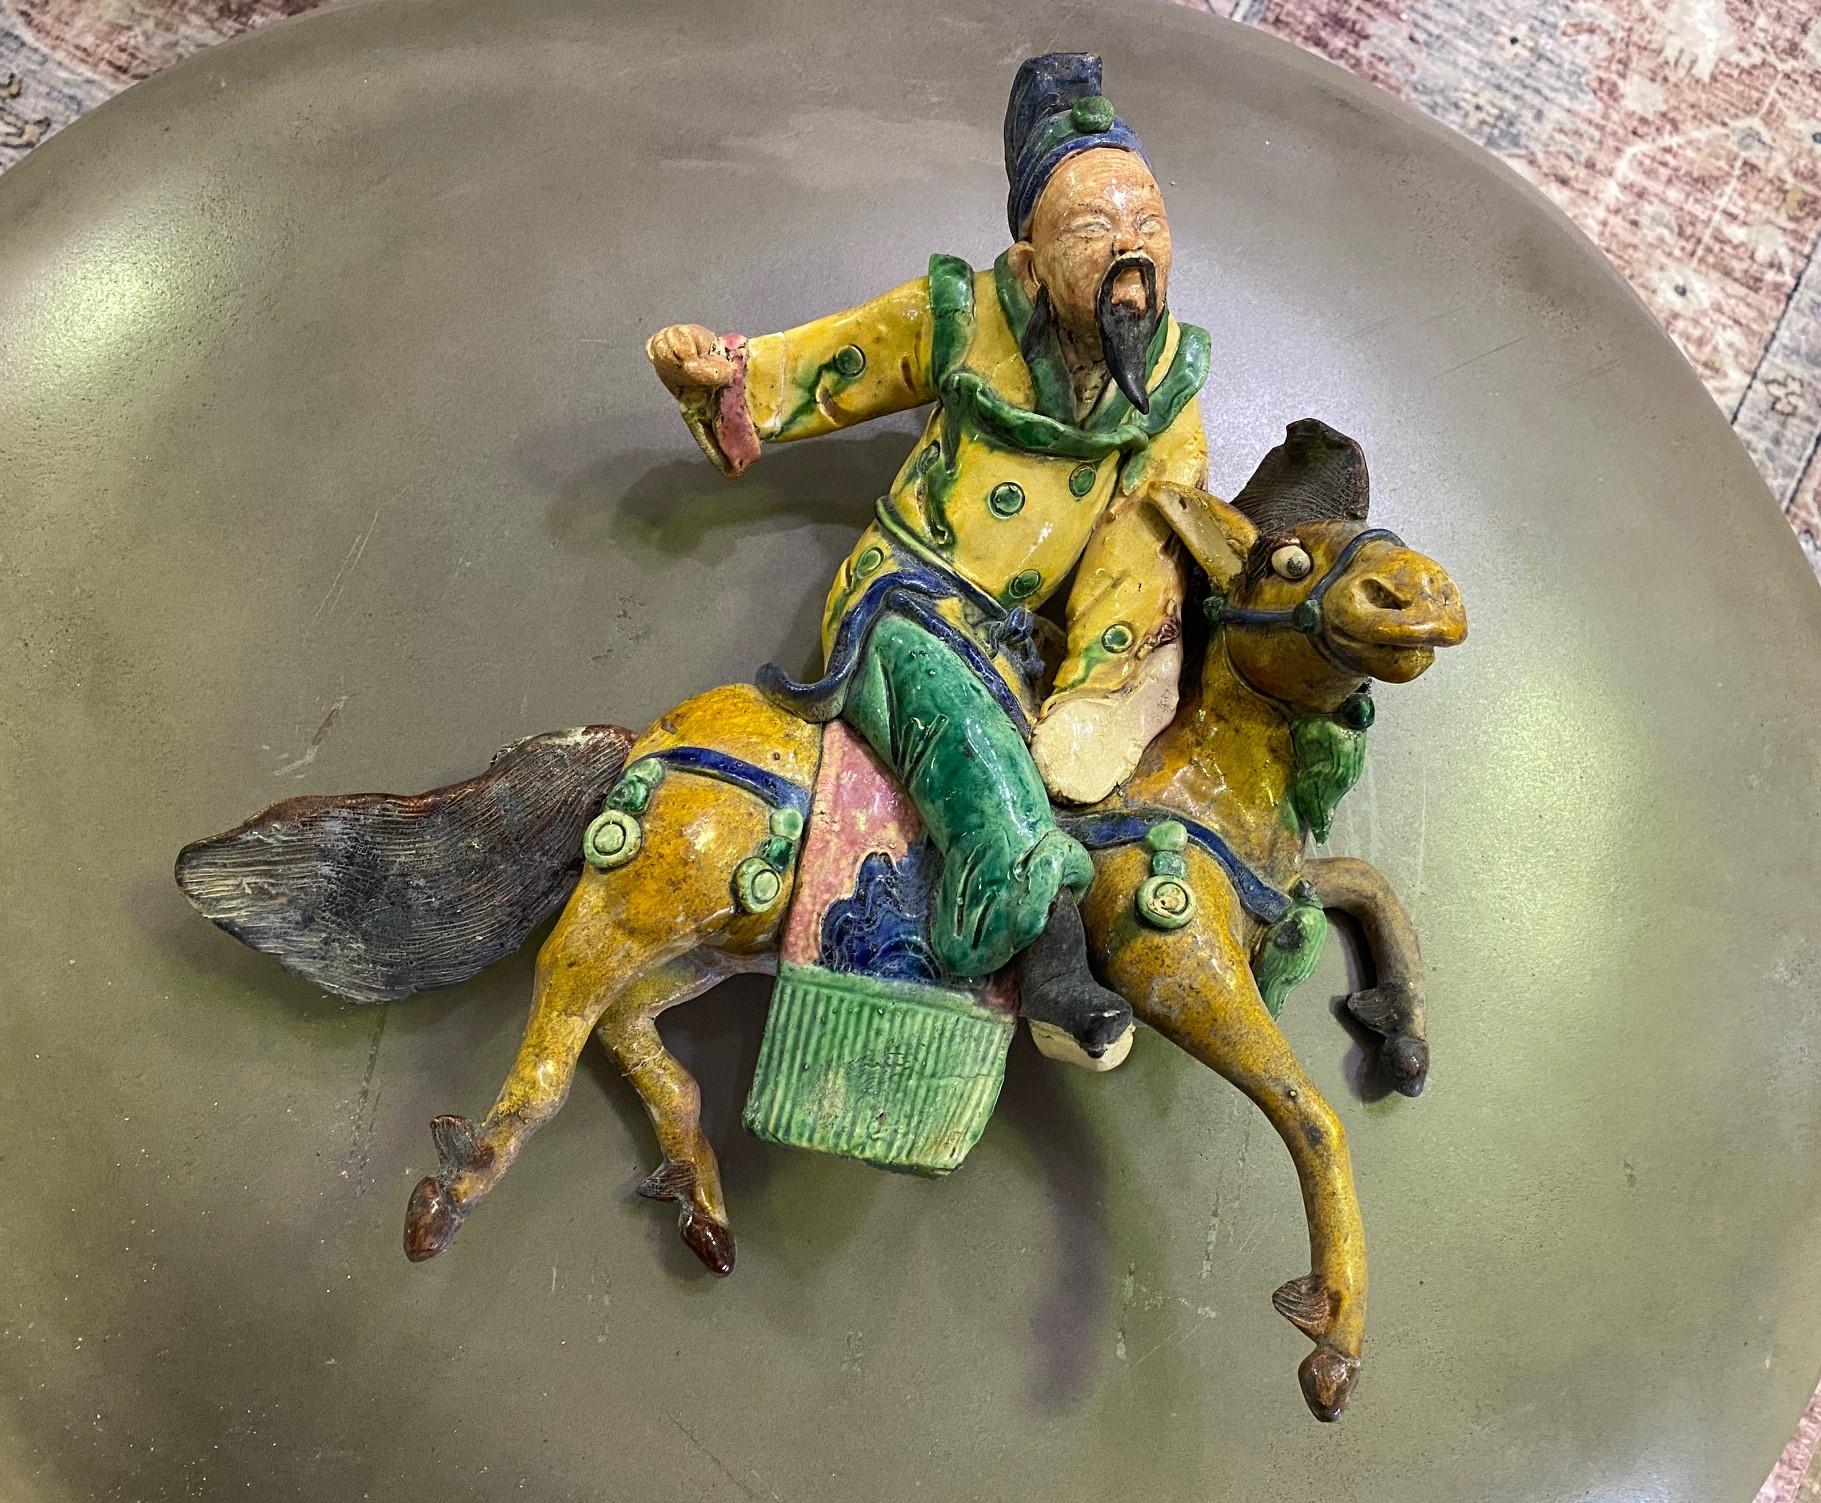 A fantastic piece. Wonderfully glazed and colored work of a seated man with brightly colored robes riding a mythical galloping horse. 

We believe this is Qing Dynasty (1644-1912) but this is not our area of expertise so are listing it simply as